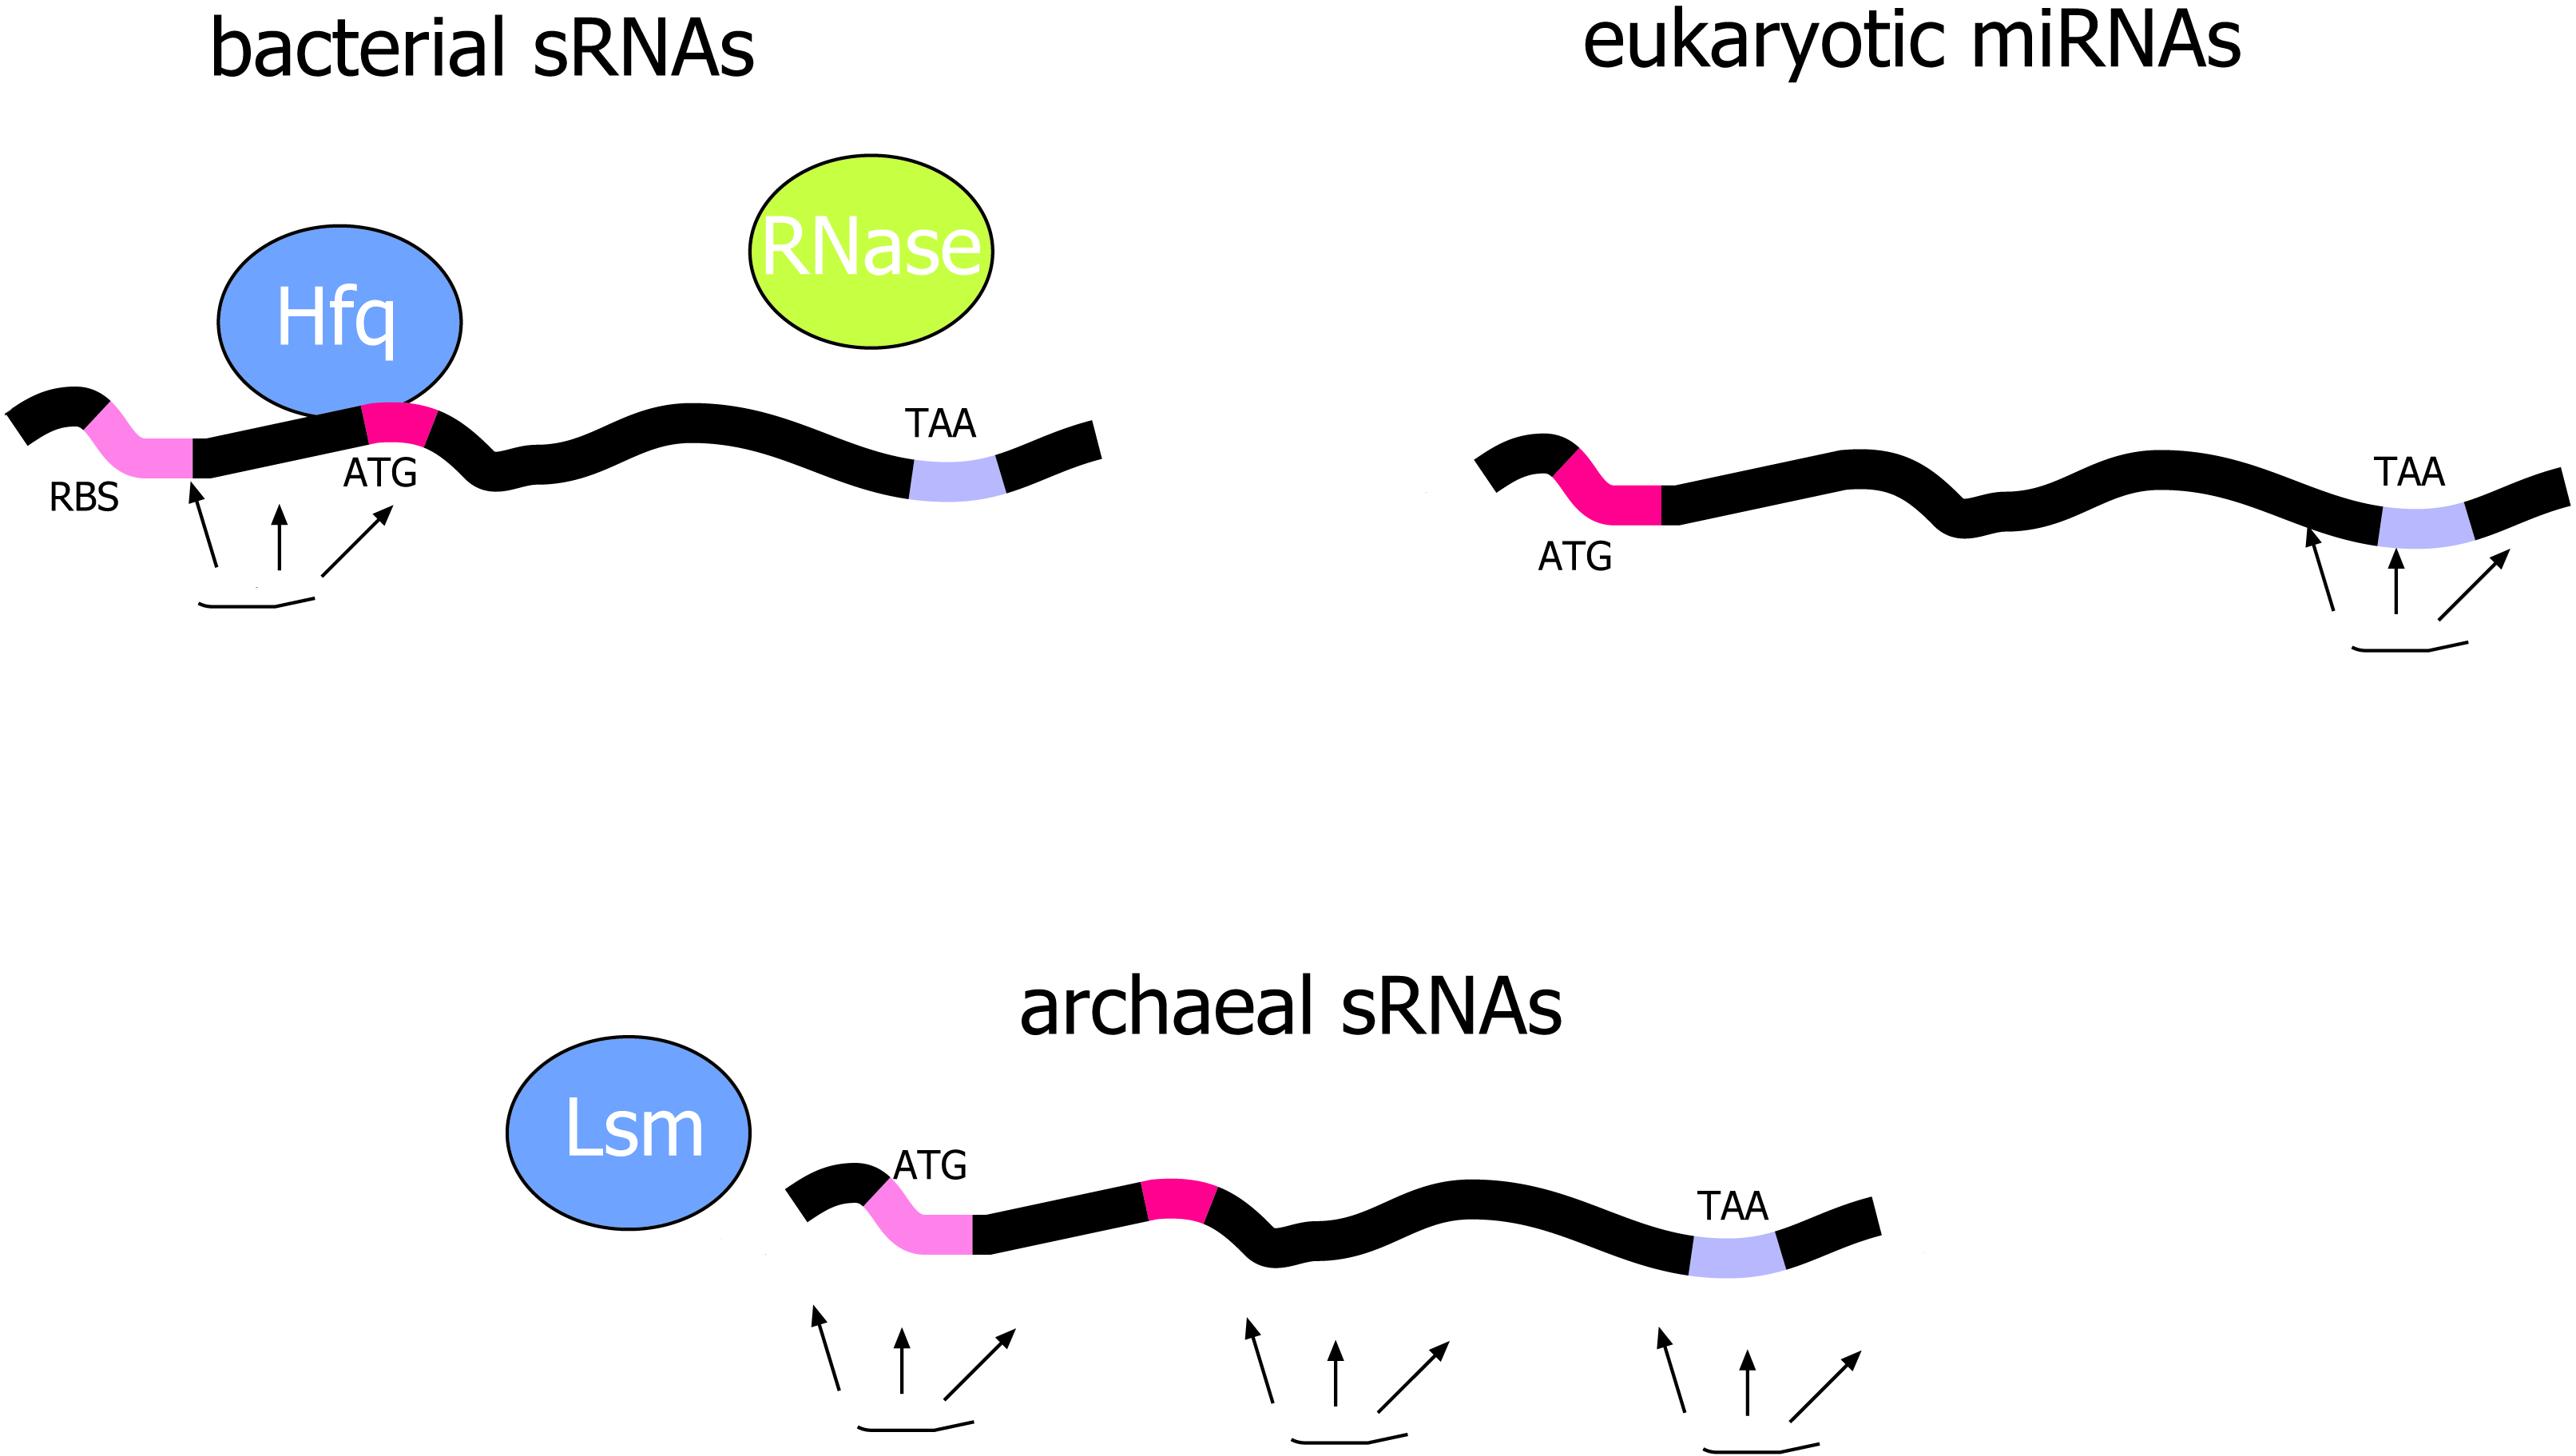 The picture shows the pathways how small RNAs work. To date quite a lot is known about the function of bacterial and eukaryotic small RNAs. Most of the bacterial sRNAs act at the 5´ end of a target mRNA and often the Hfq protein is required. Sometimes an RNase is sequestered which degrades the RNA. Eukaryotic miRNAs target often the mRNA 3´ end. The mode of action of archaeal sRNAs is not known yet. They might require the Lsm protein and/or an RNase but nothing is known about that process yet. ATG: start codon on the mRNA, TAA: stop codon on the mRNA, RBS: ribosome binding site.